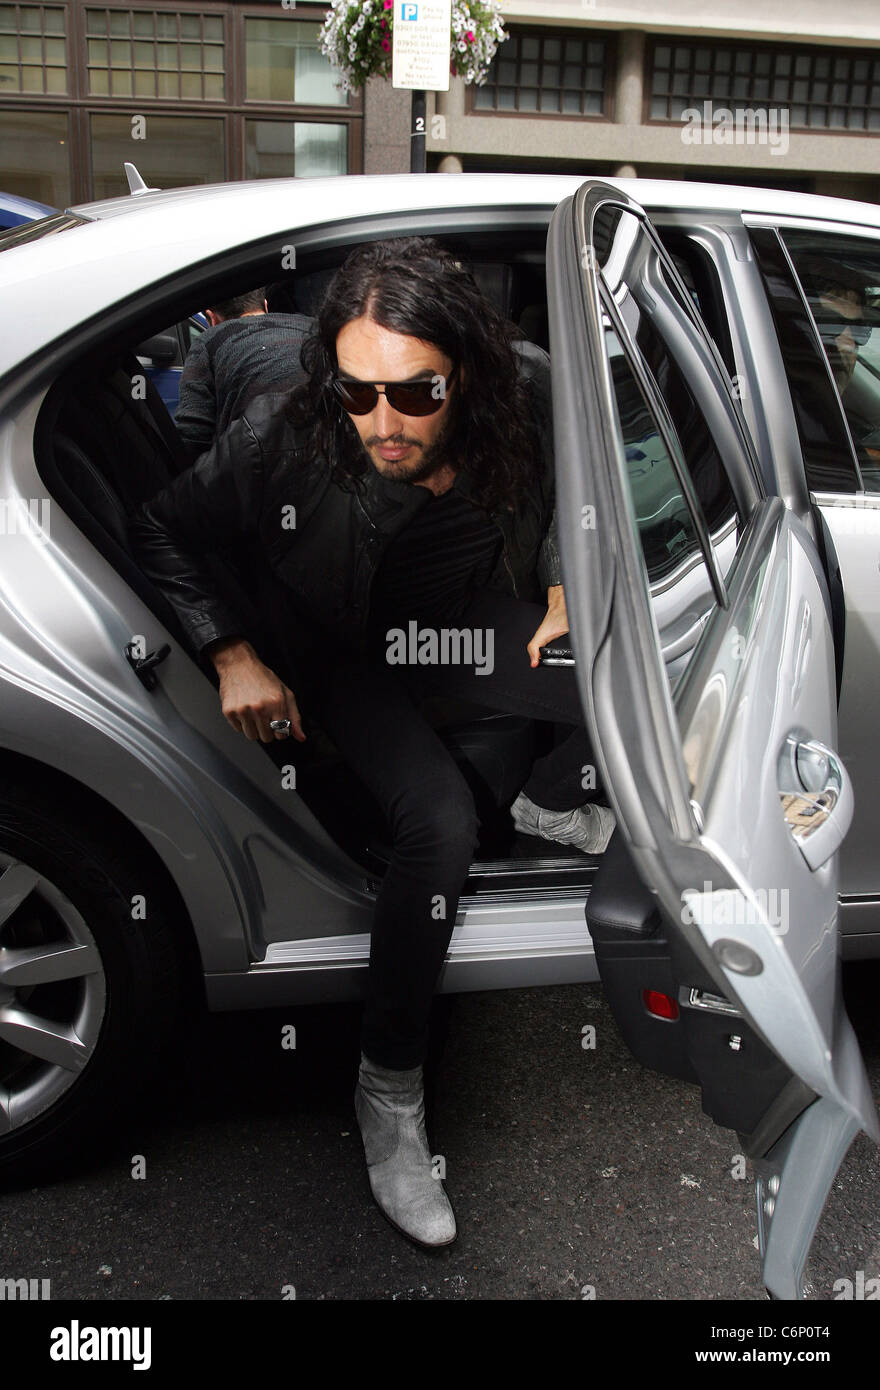 Russell Brand arrives at the BBC Radio 1 studios London, England - 18.06.10 Stock Photo